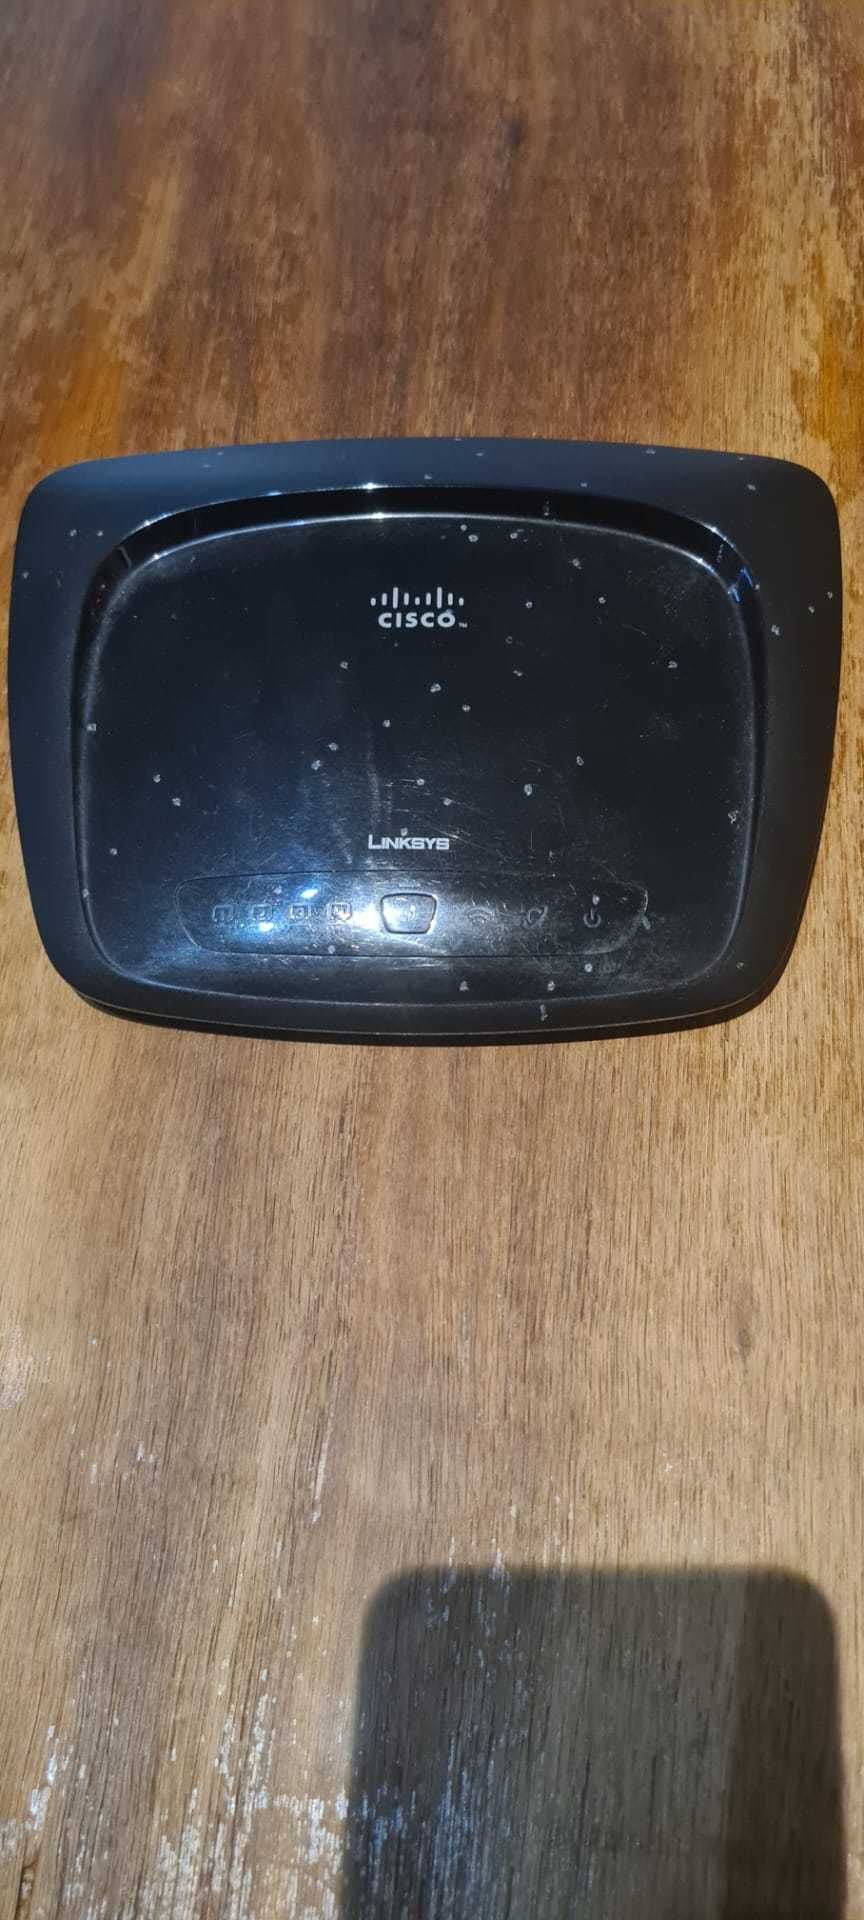 Barato! Wireless-N Home Router Linksys (Cisco) WRT120N